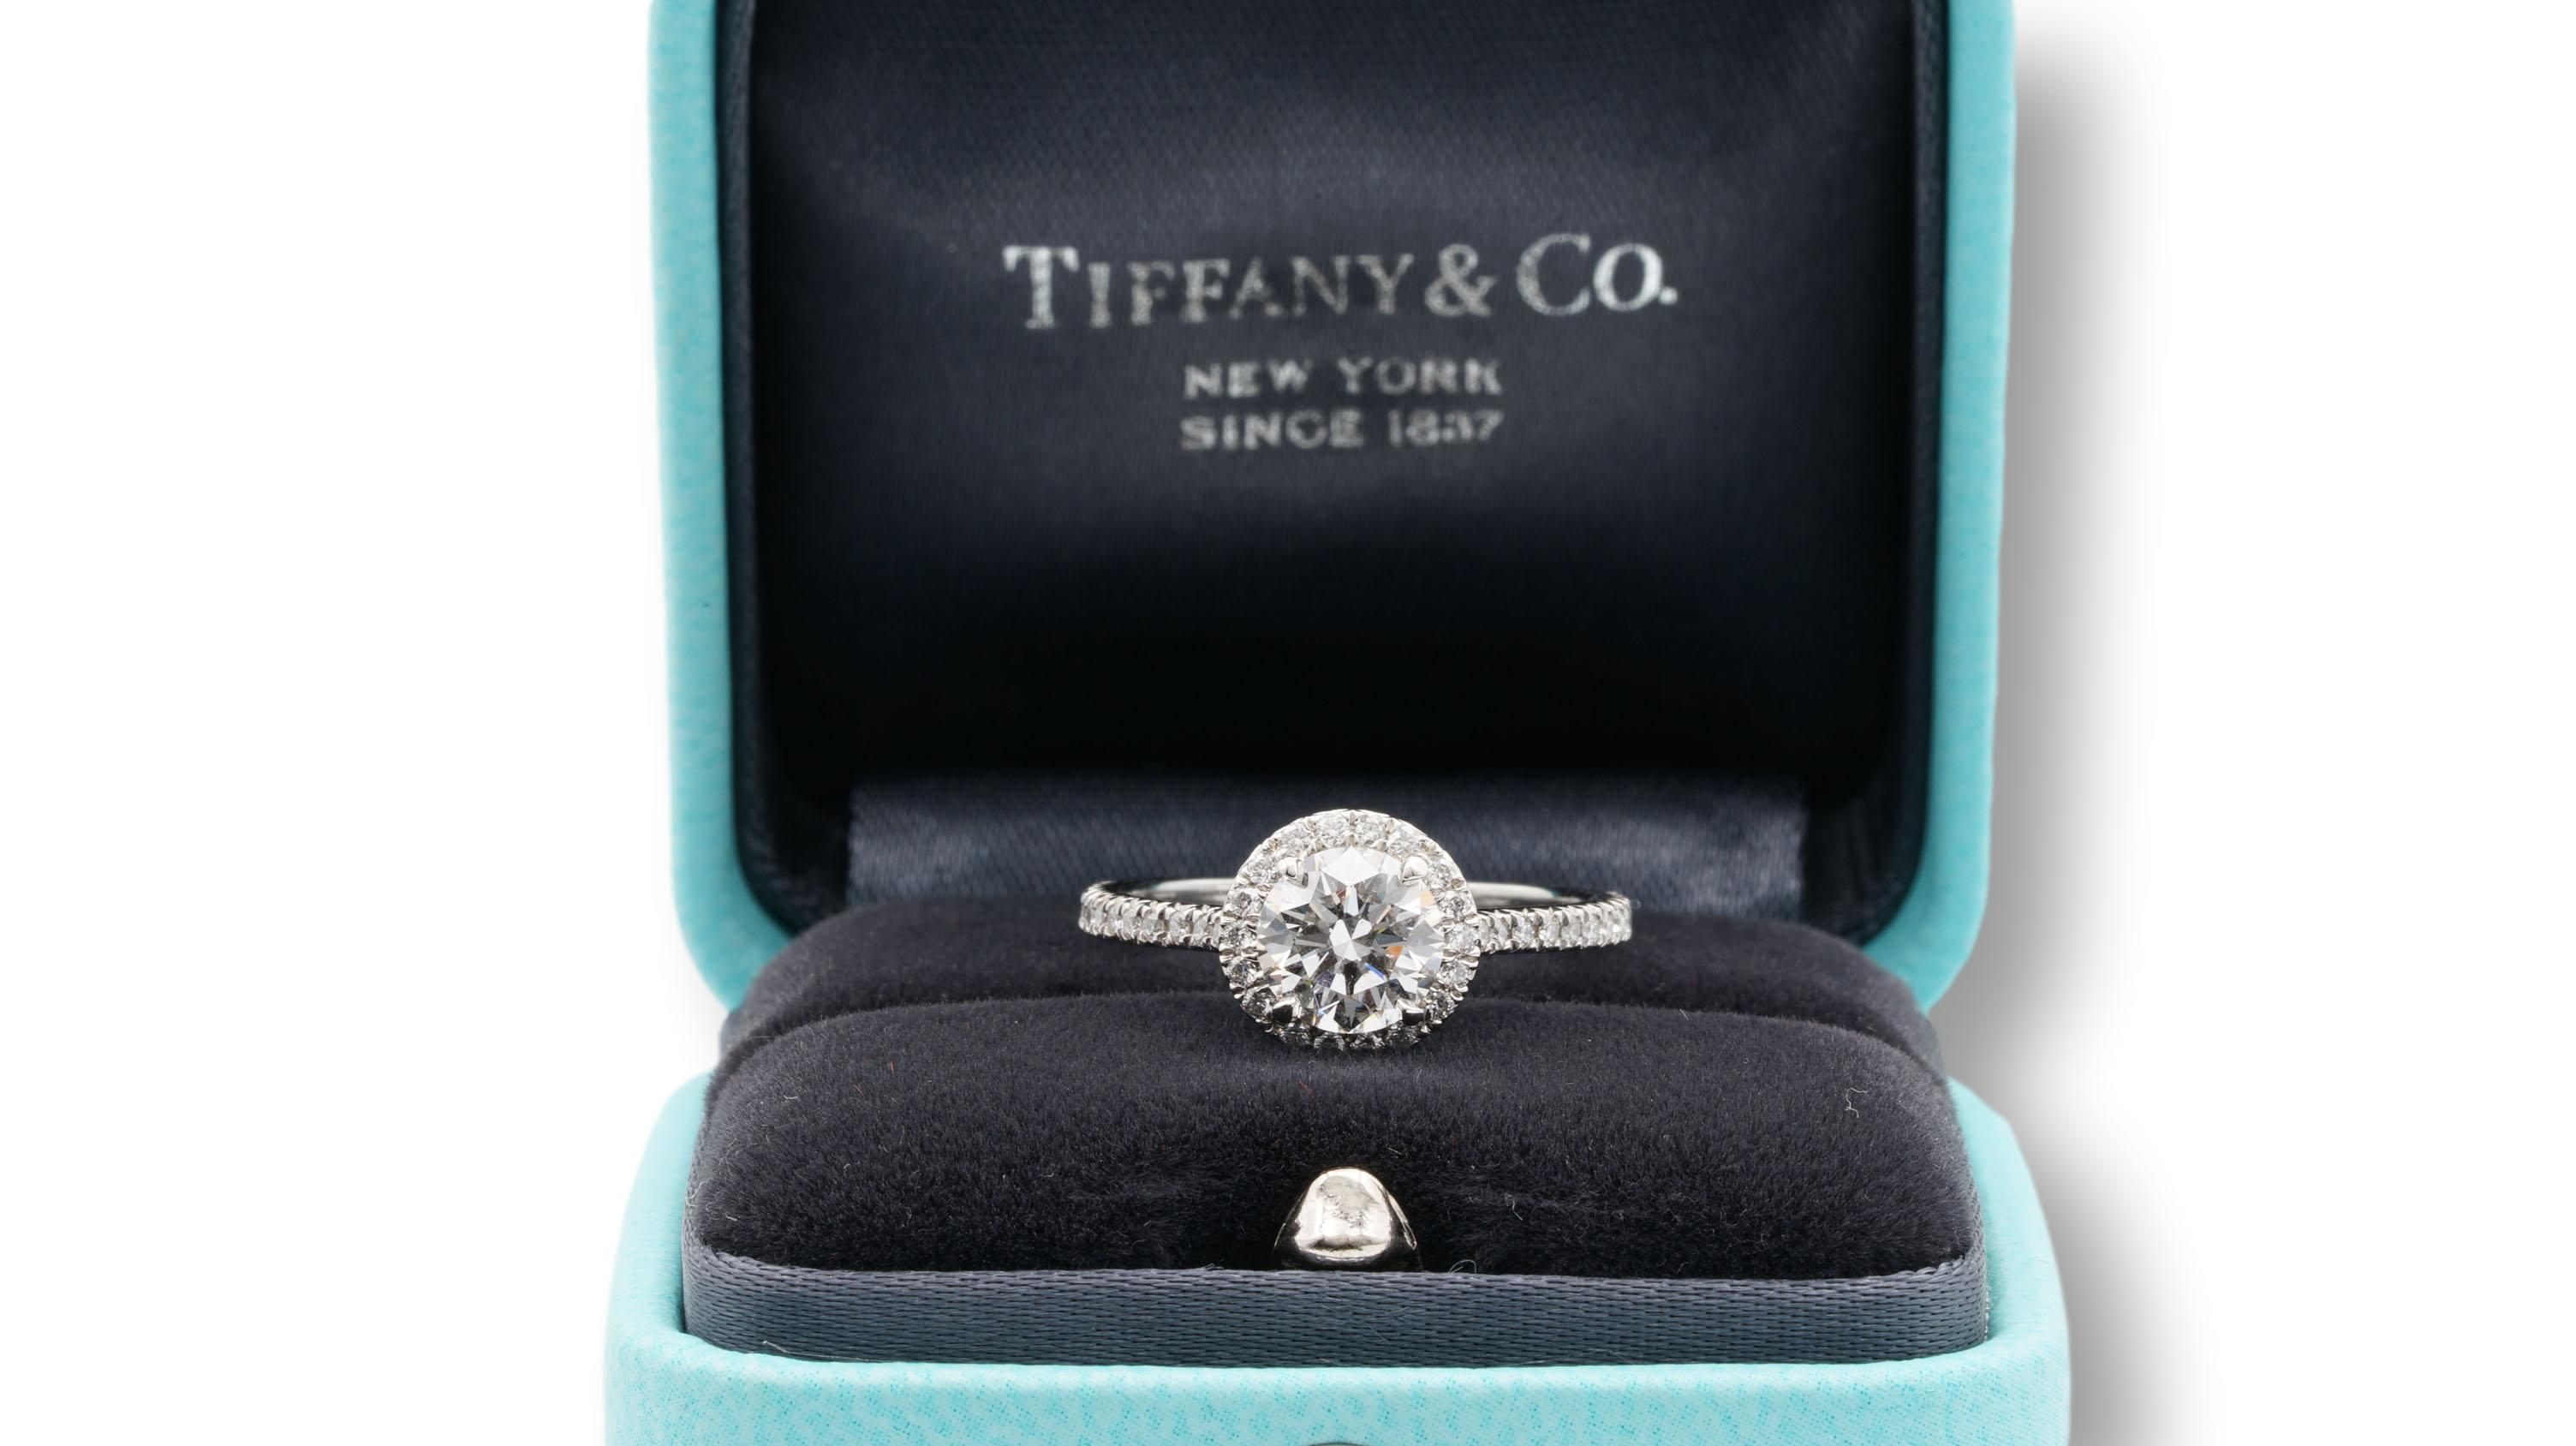 Sell Tiffany jewelry - Sell your Tiffany & Co. jewelry online